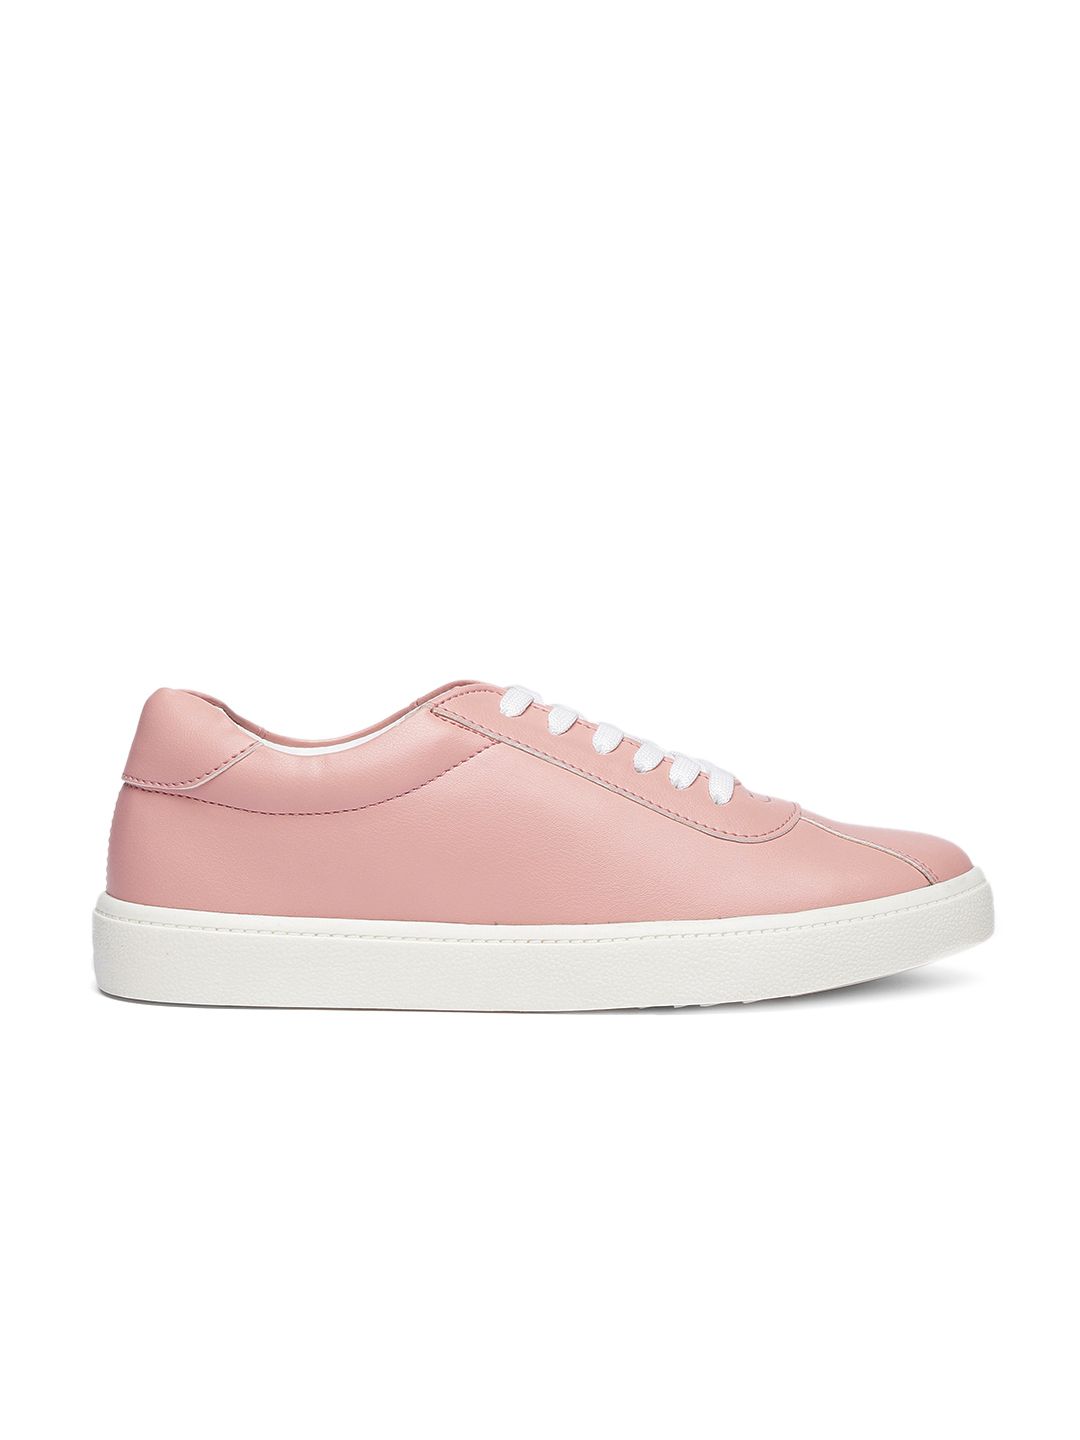 ether Women Pink Sneakers Price in India